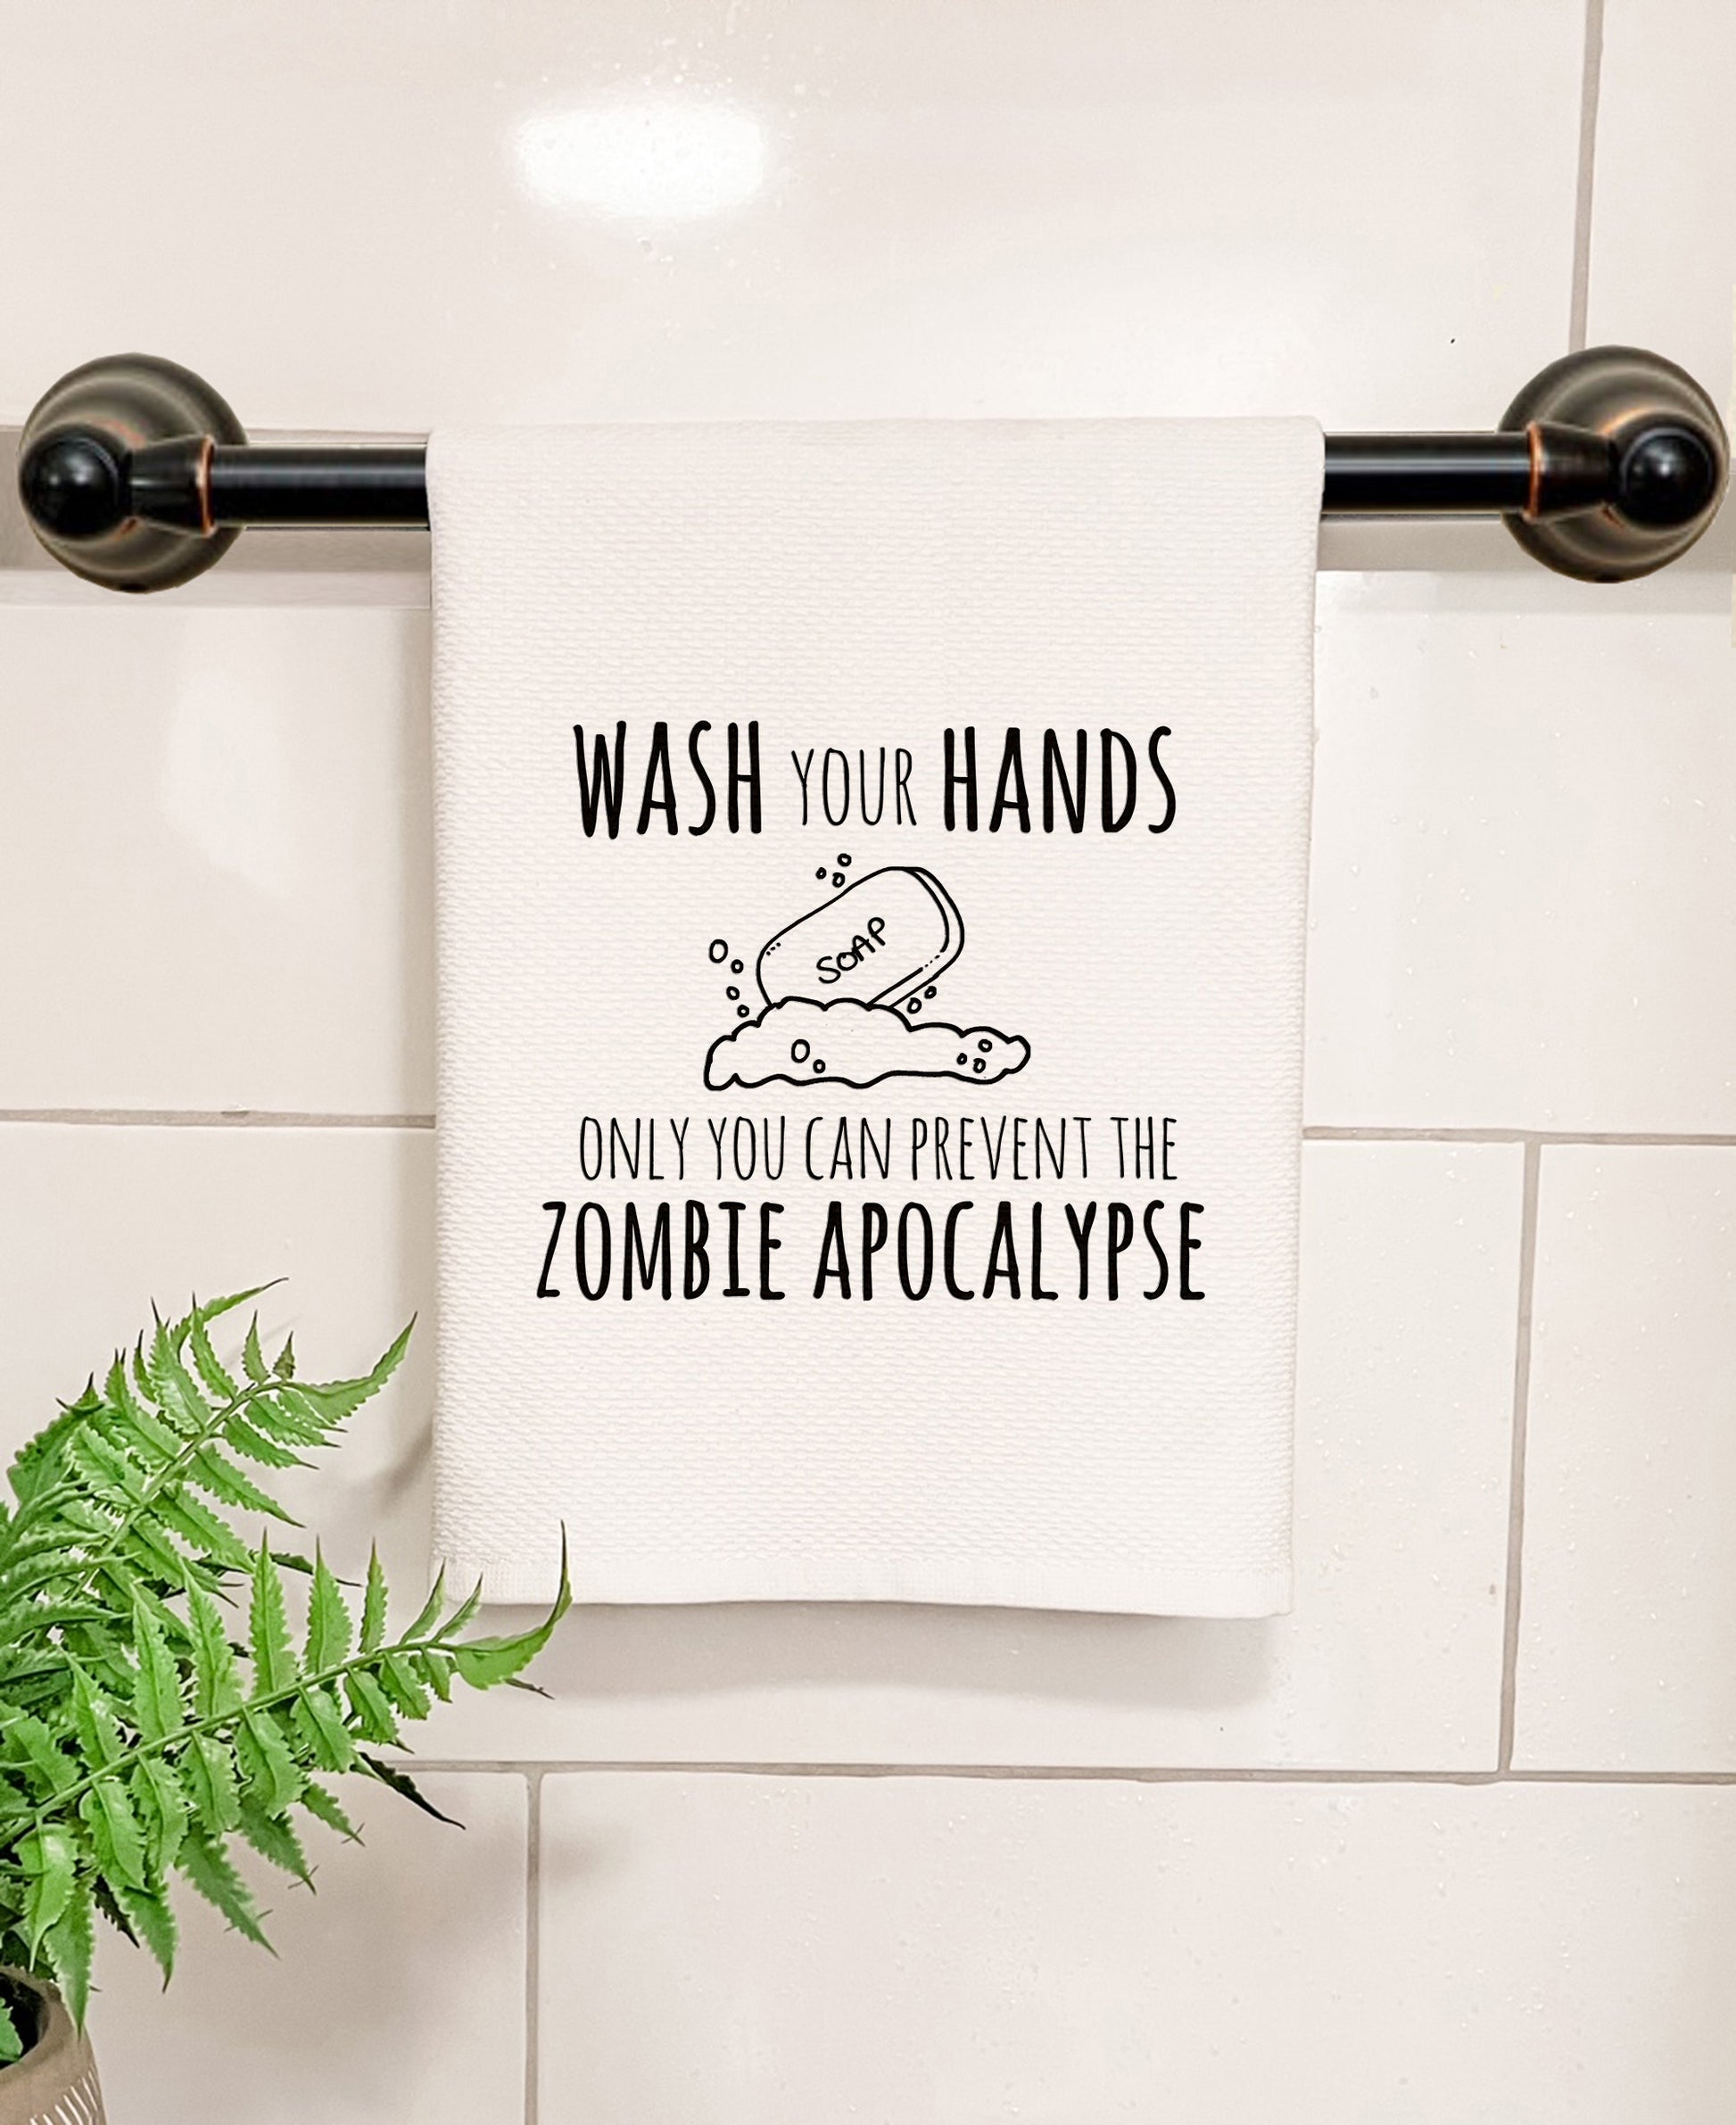 Wash Your Hands, Only You Can Prevent The Zombie Apocalypse - Kitchen/Bathroom Hand Towel (Waffle Weave) - MoonlightMakers